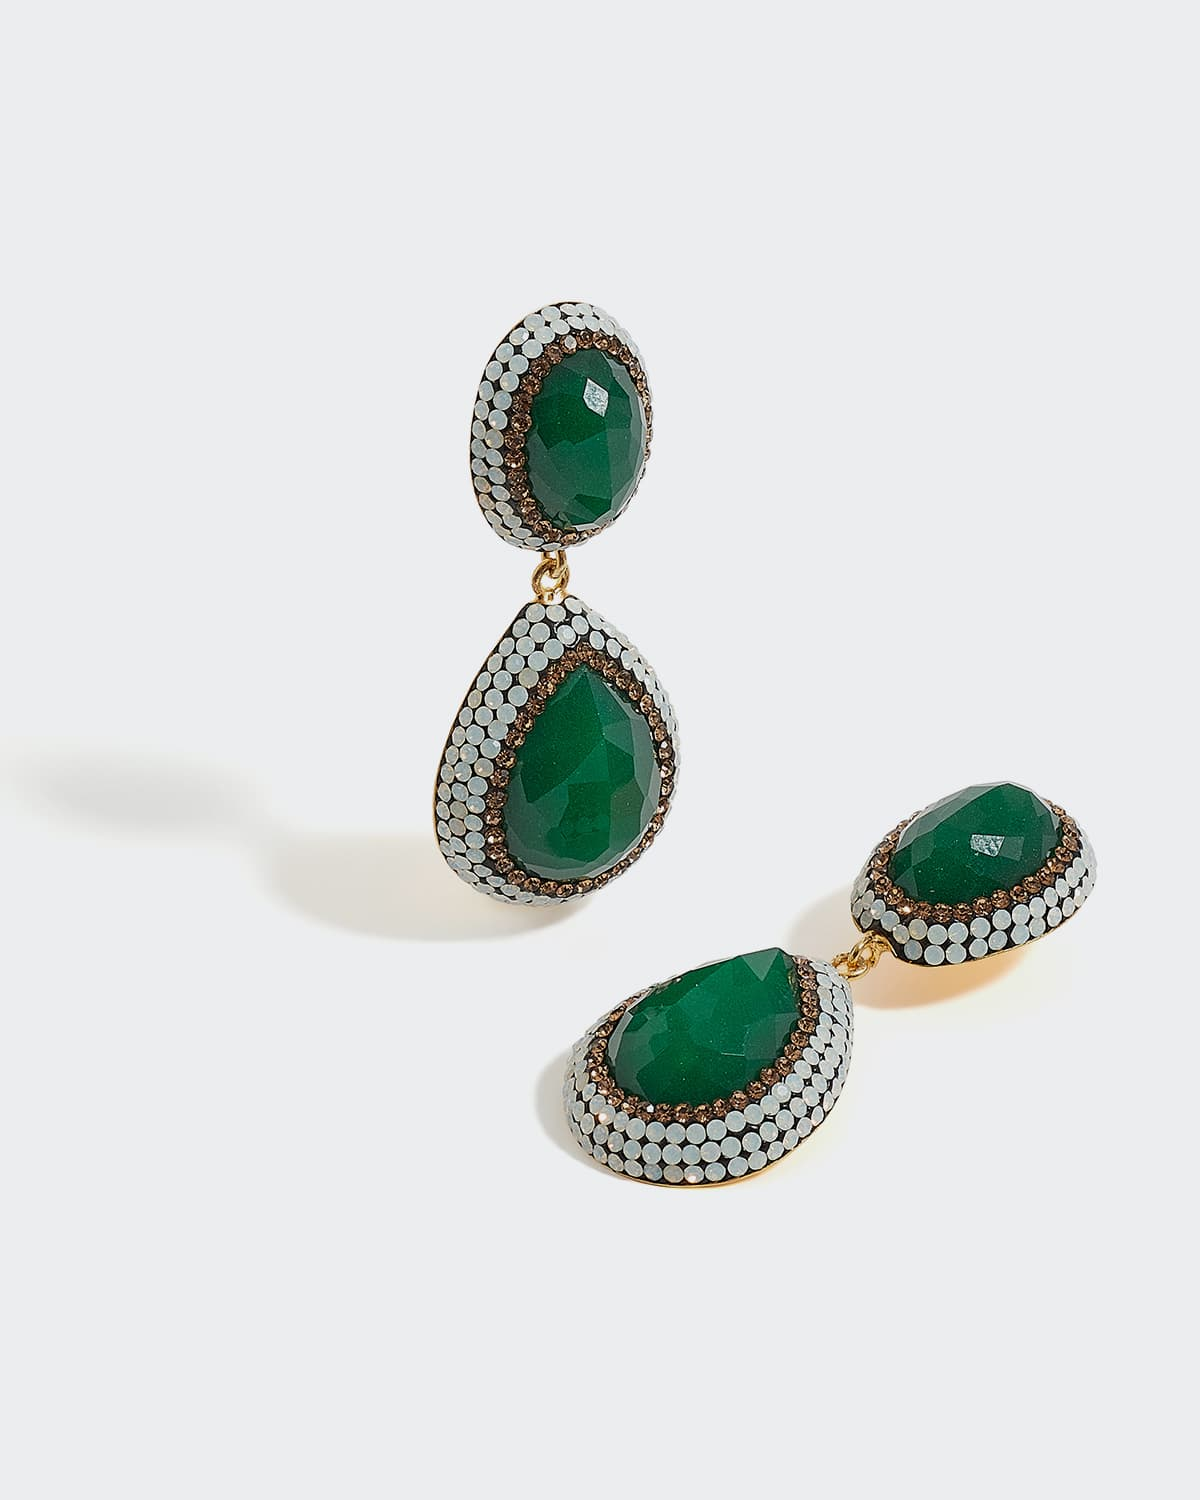 Soru Jewellery Jade Green earrings Large faceted jade green gemstones surrounded by opal and topaz sparkling crystals, 18ct gold plated solid silver